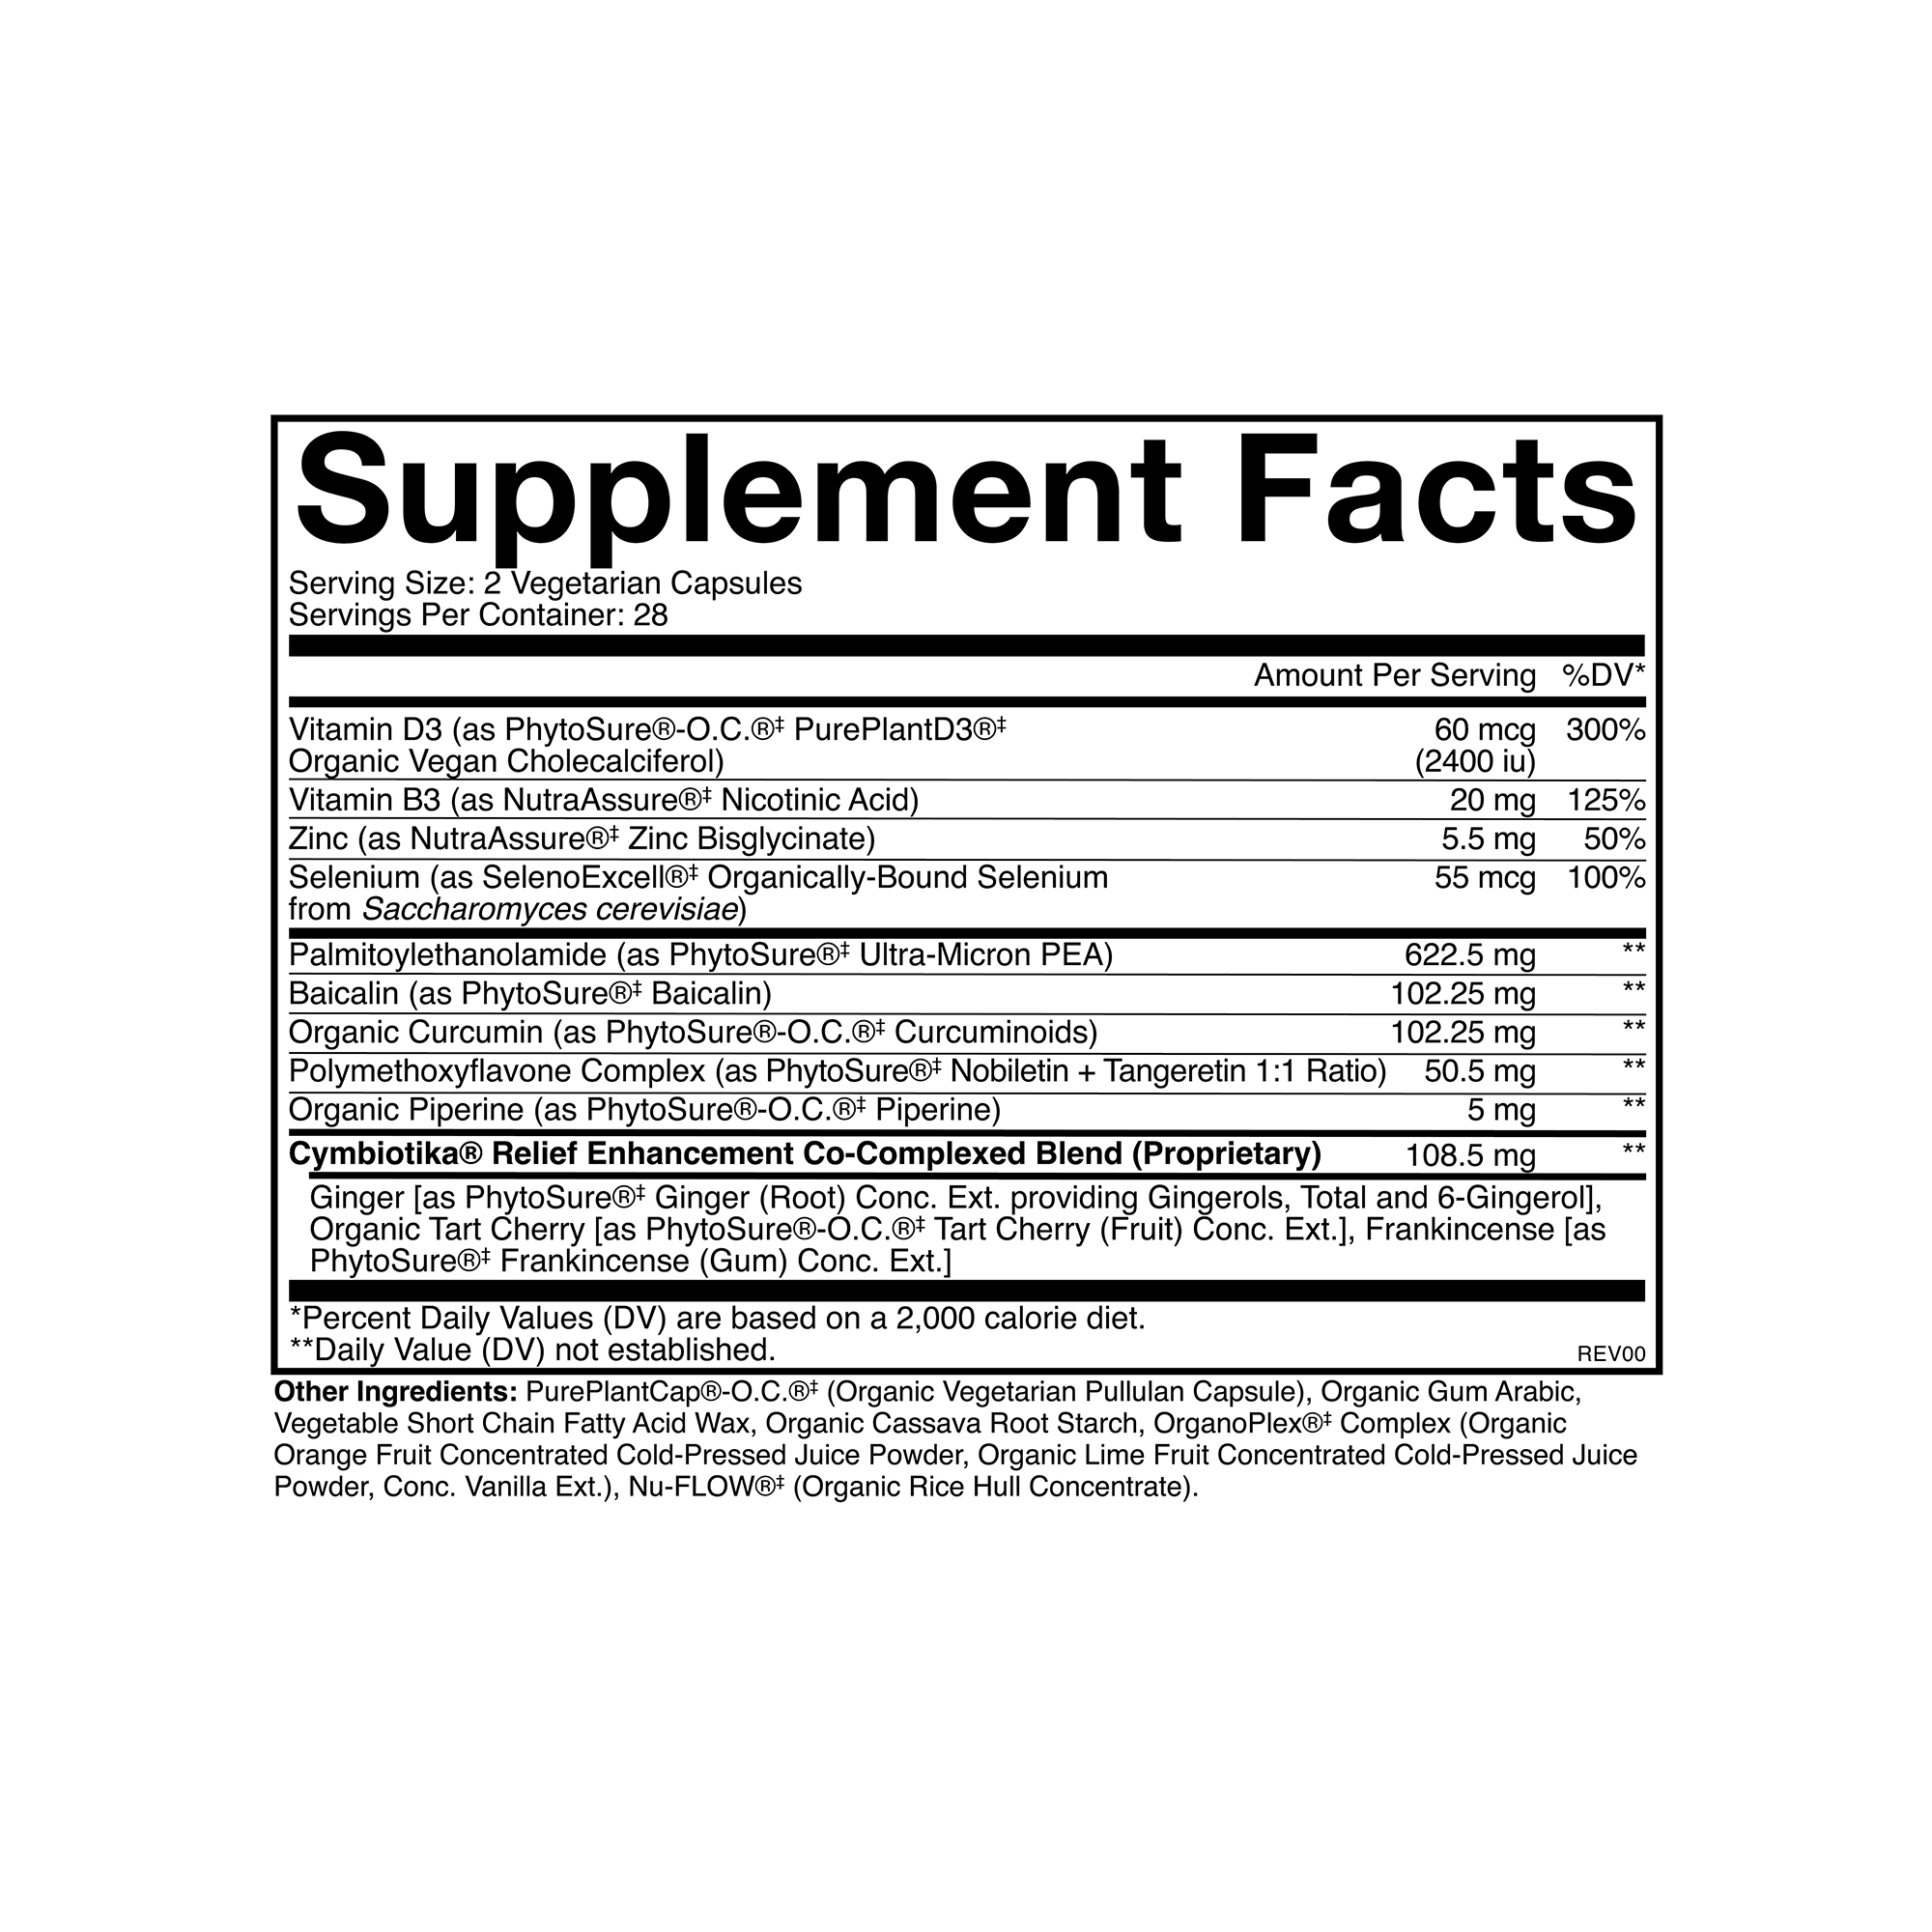 Inflammatory Health Supplement Facts